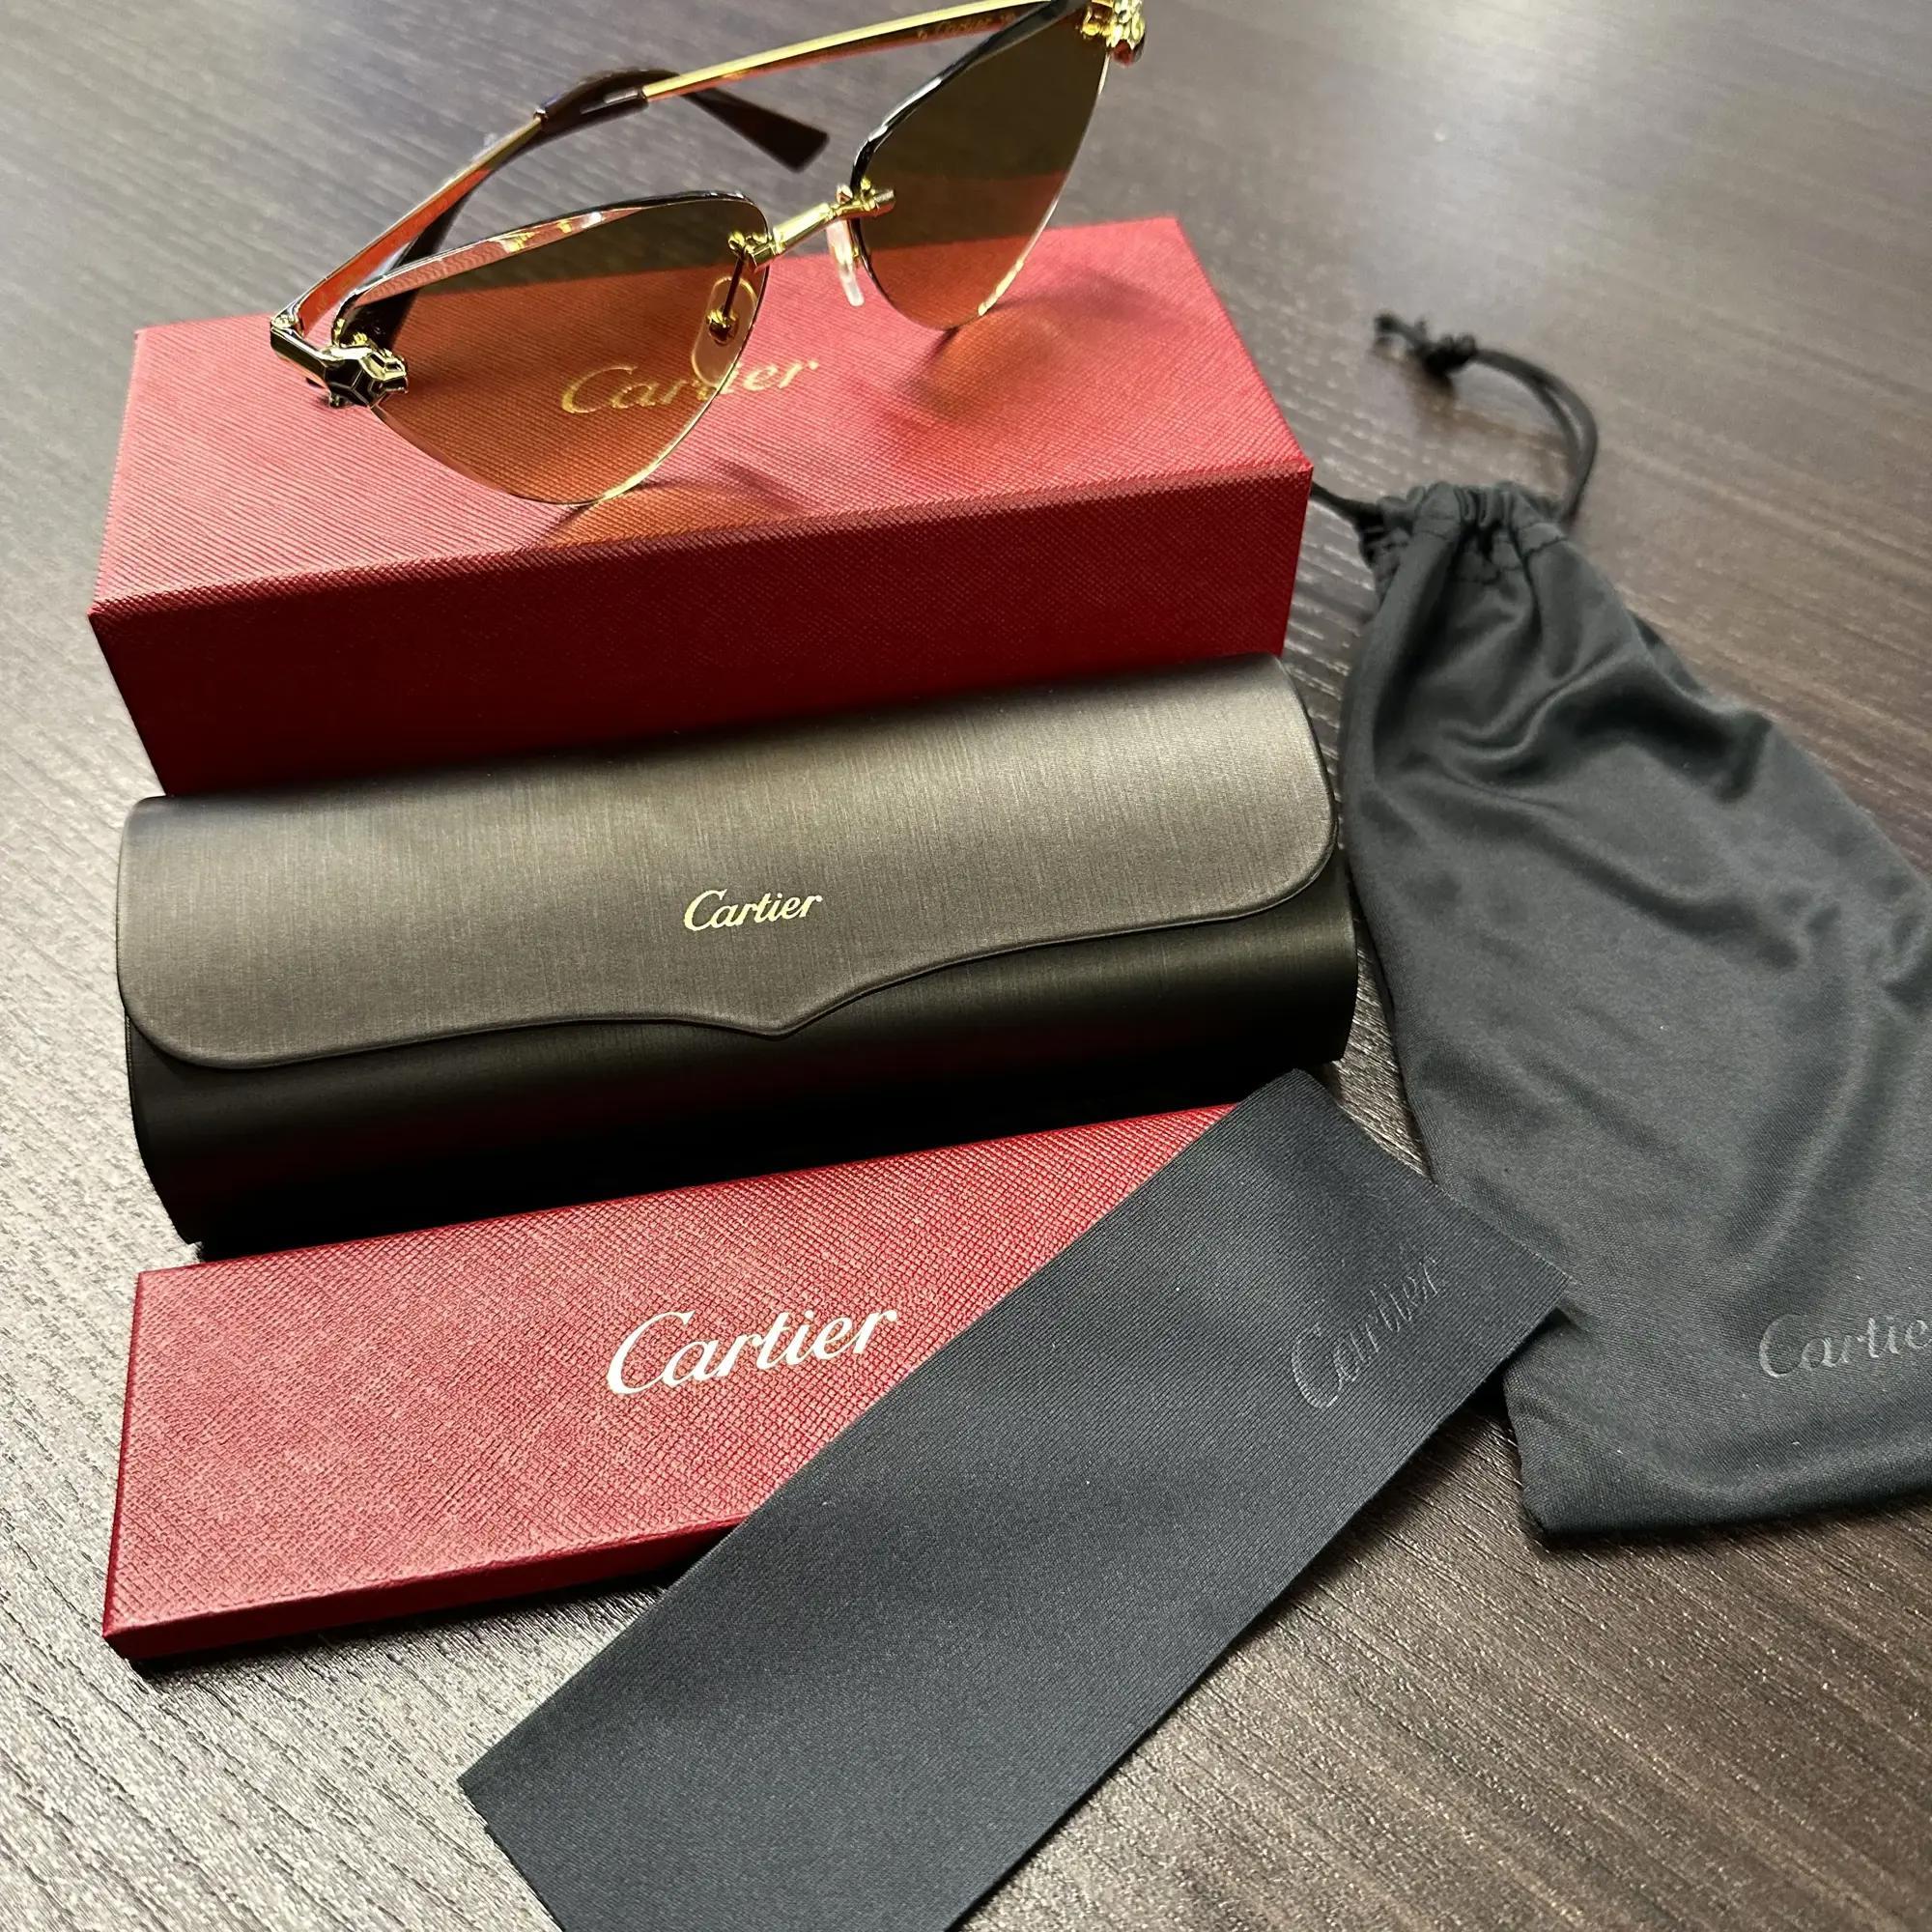 Cartier Panthere De Cartier Rimless Smooth Golden Finish Cats Eye Sunglasses For Sale 2